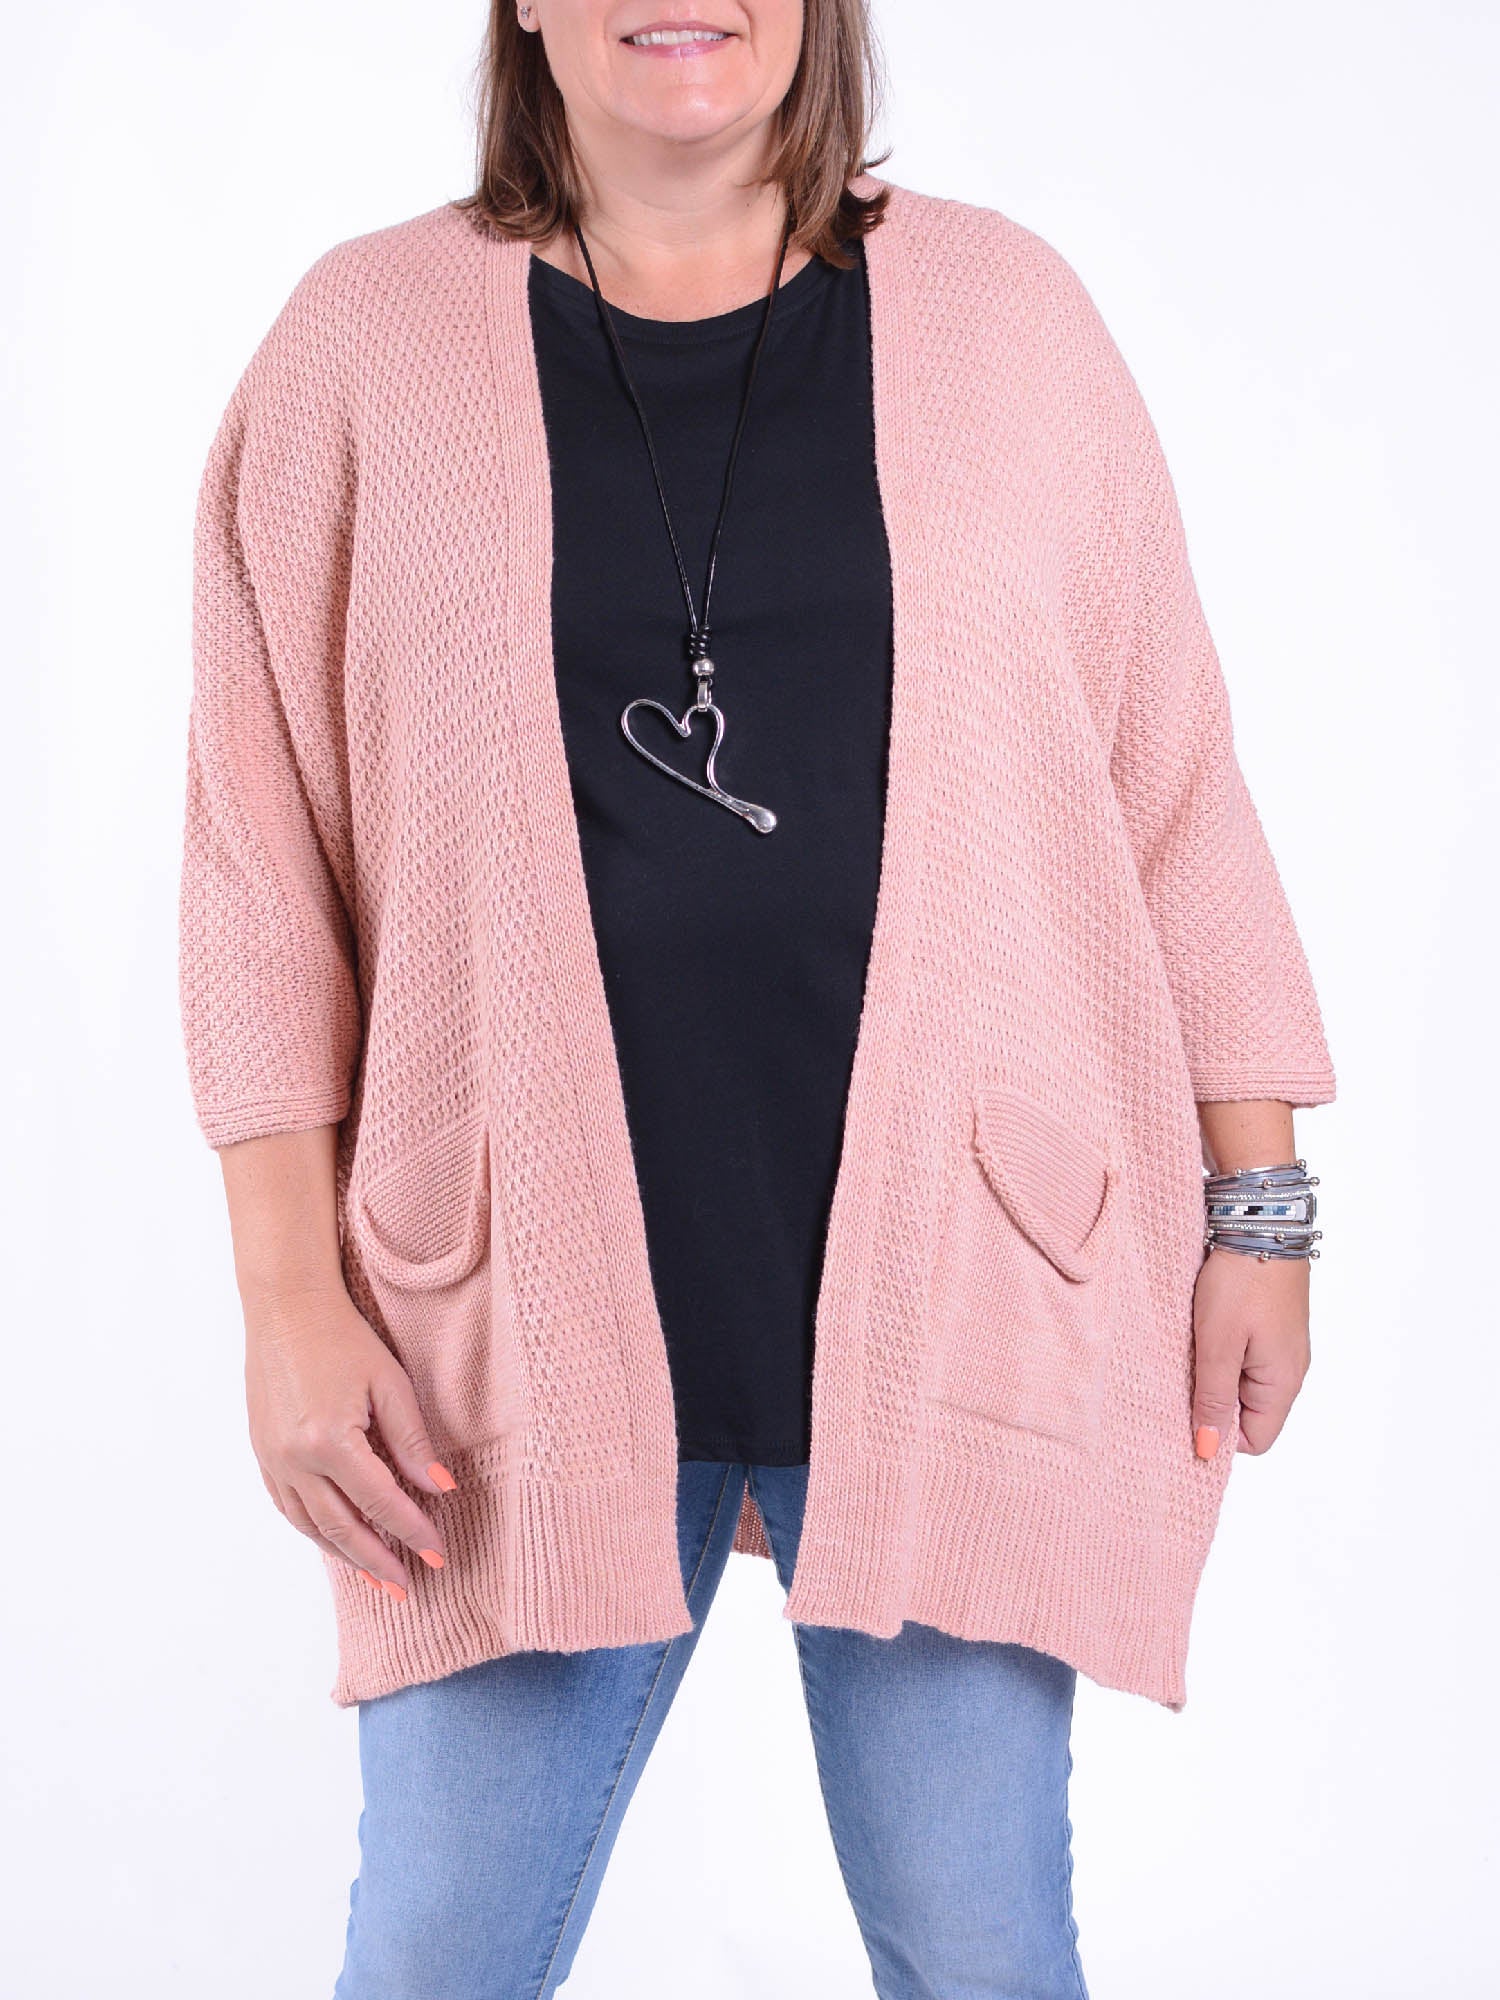 Open Front Cardigan - C18, , Pure Plus Clothing, Lagenlook Clothing, Plus Size Fashion, Over 50 Fashion